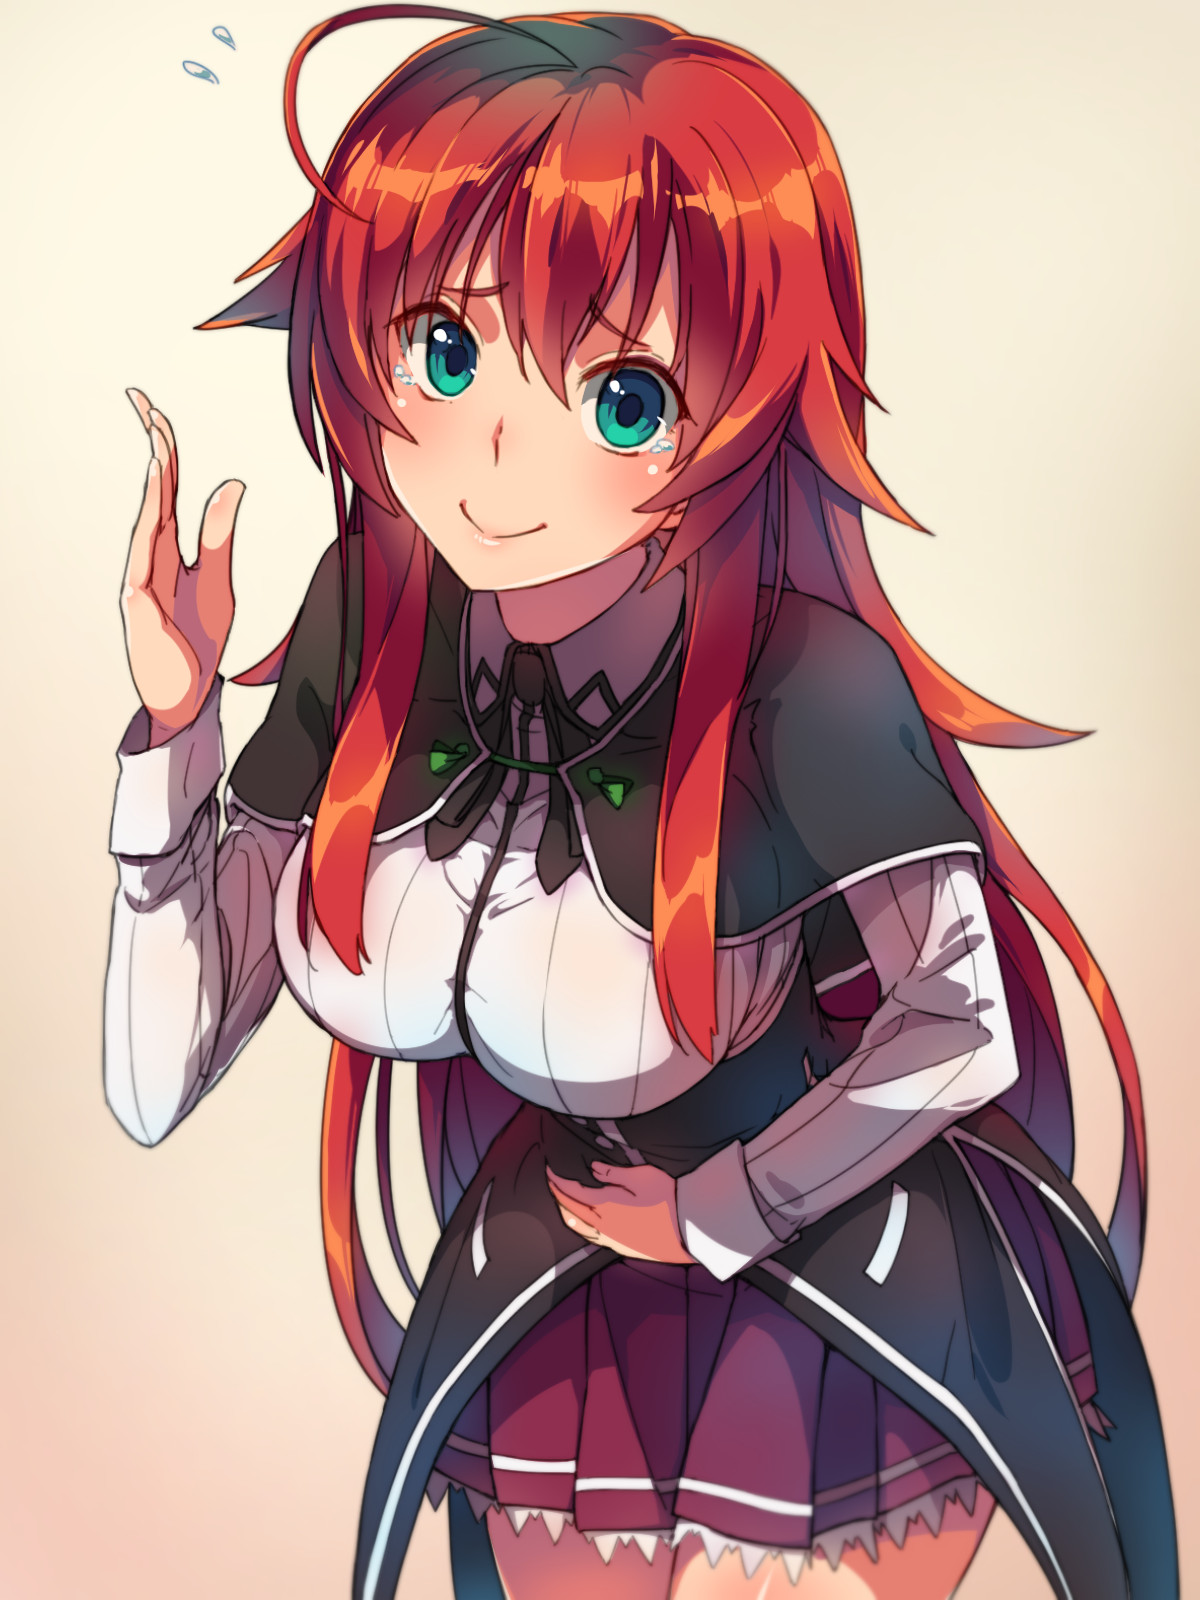 Anime 1200x1600 High School DxD anime girls Gremory Rias school uniform JK ahoge 2D thighs arched back long hair redhead smiling hand on belly blushing looking at viewer curvy wide hips anime fan art green eyes portrait display